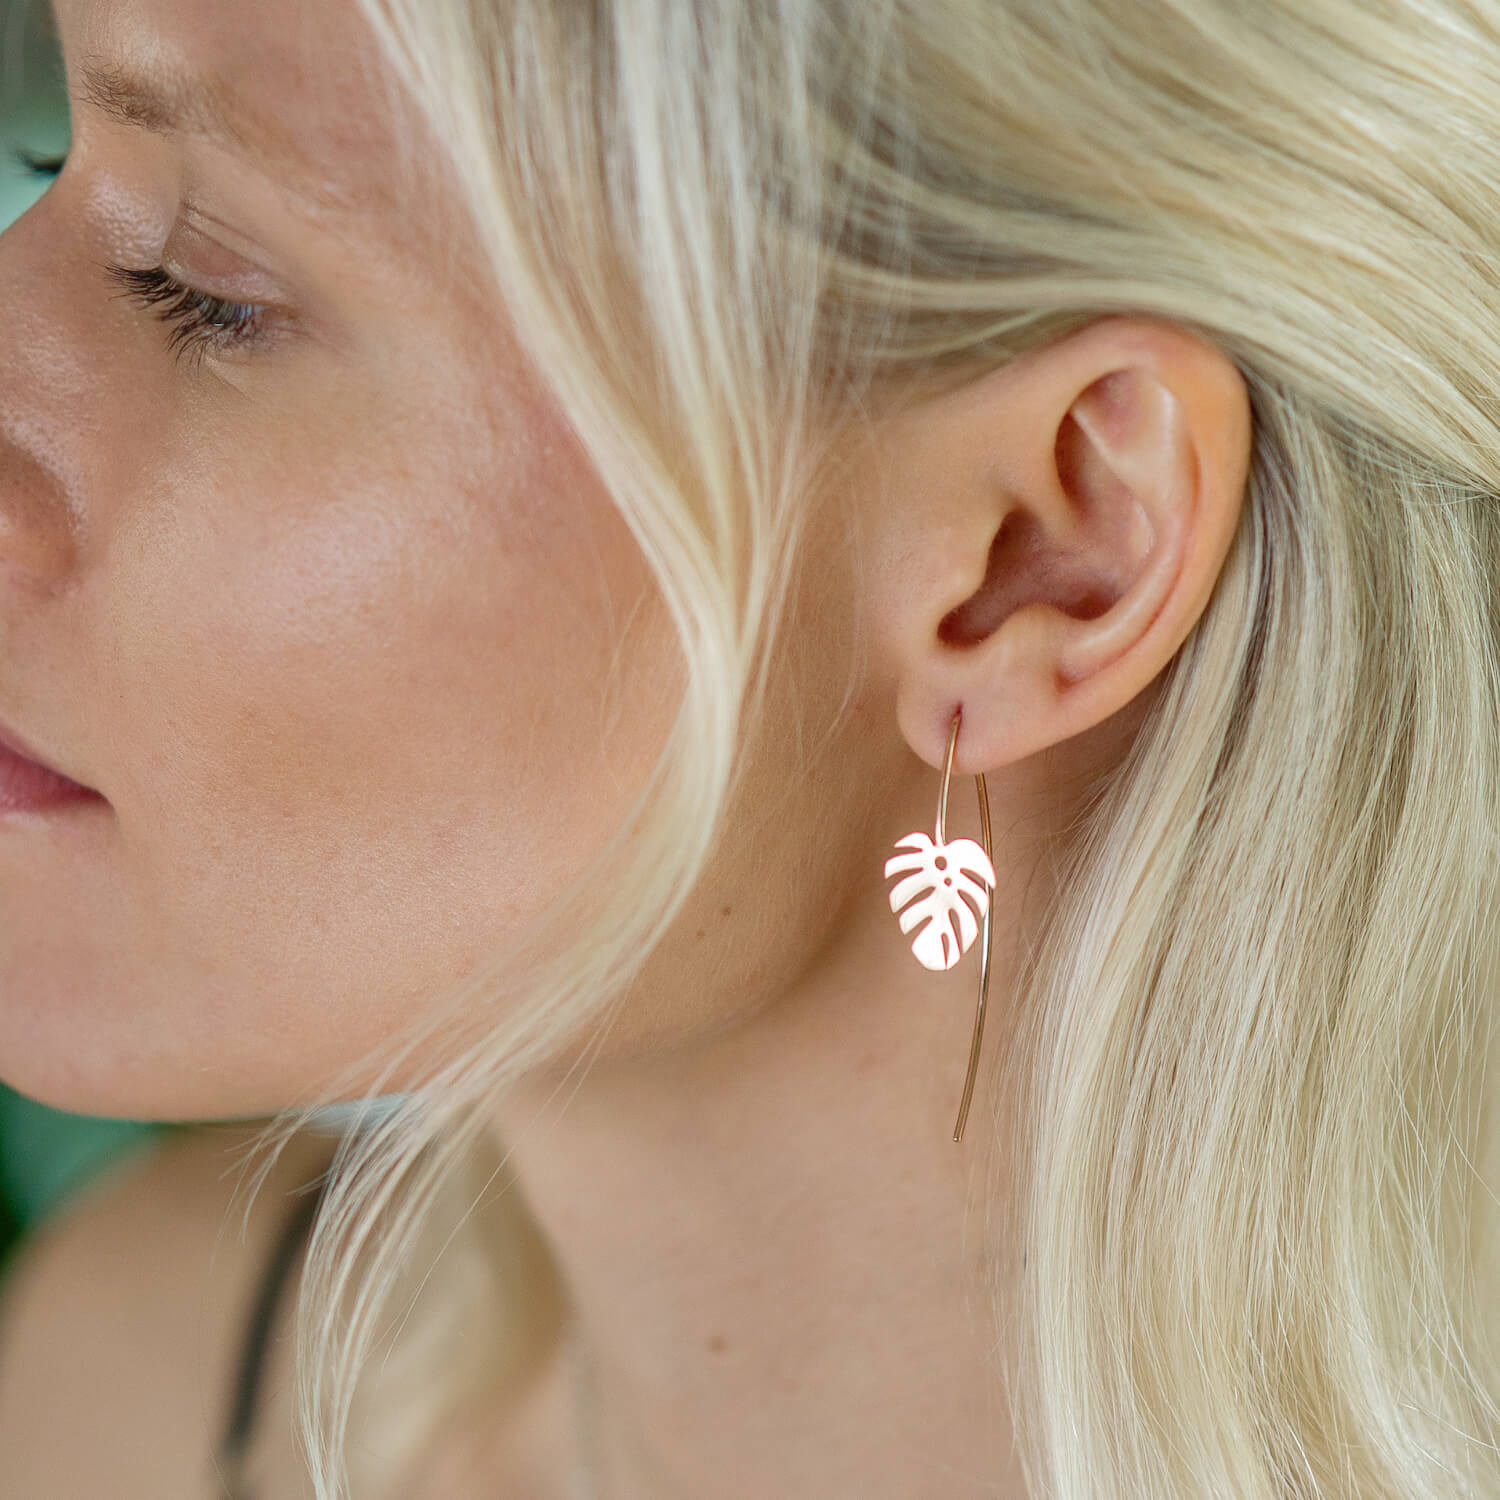 A model wearing a gold dropback earring with monstera charm